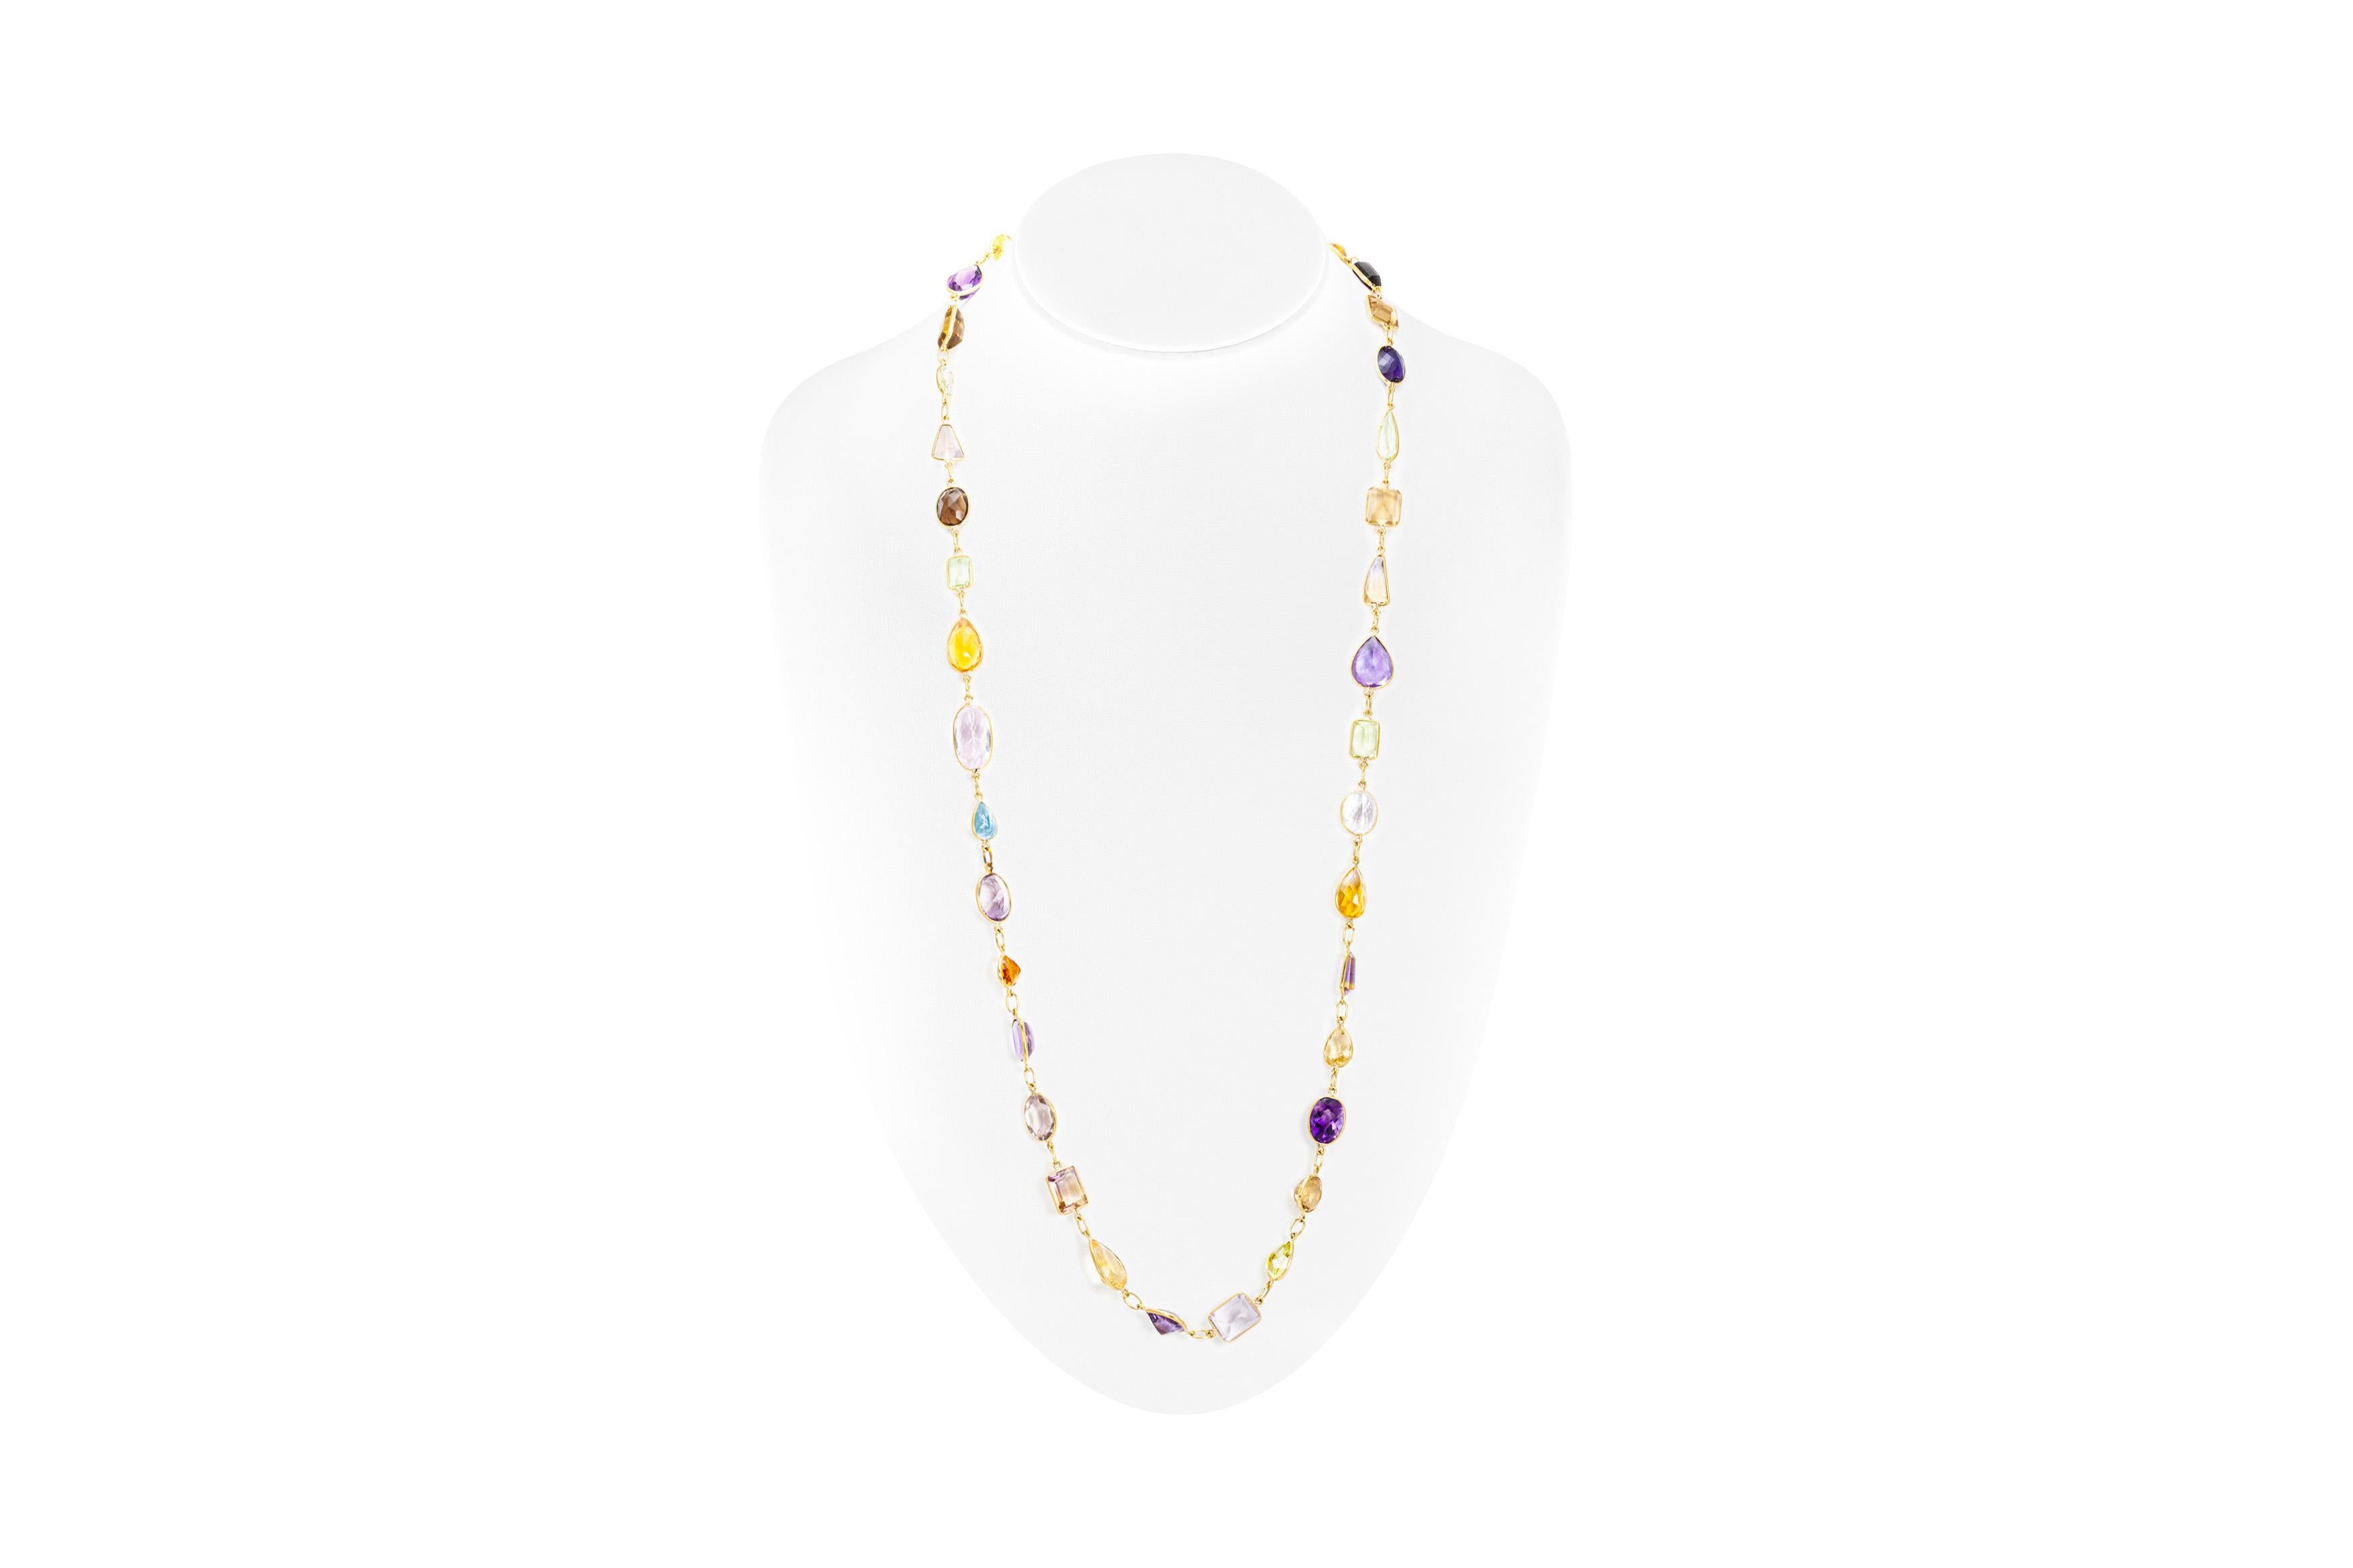 Beautiful multi colored tourmaline necklace is finely crafted in 18K yellow gold.
